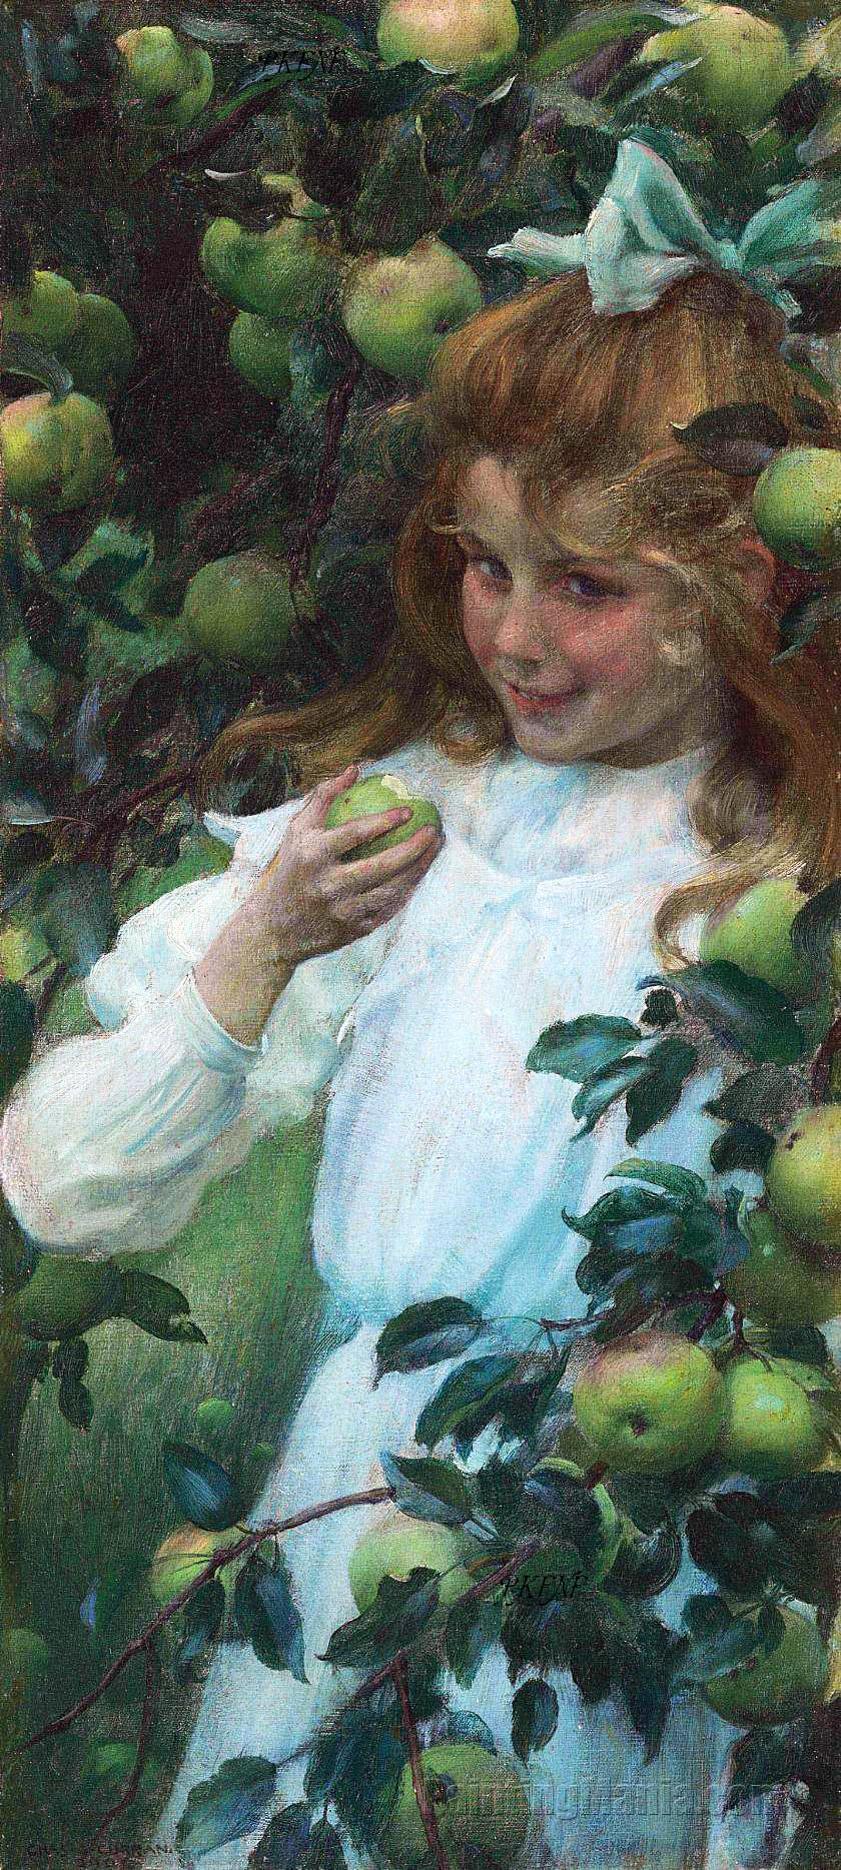 In the Orchard (Green Apples)